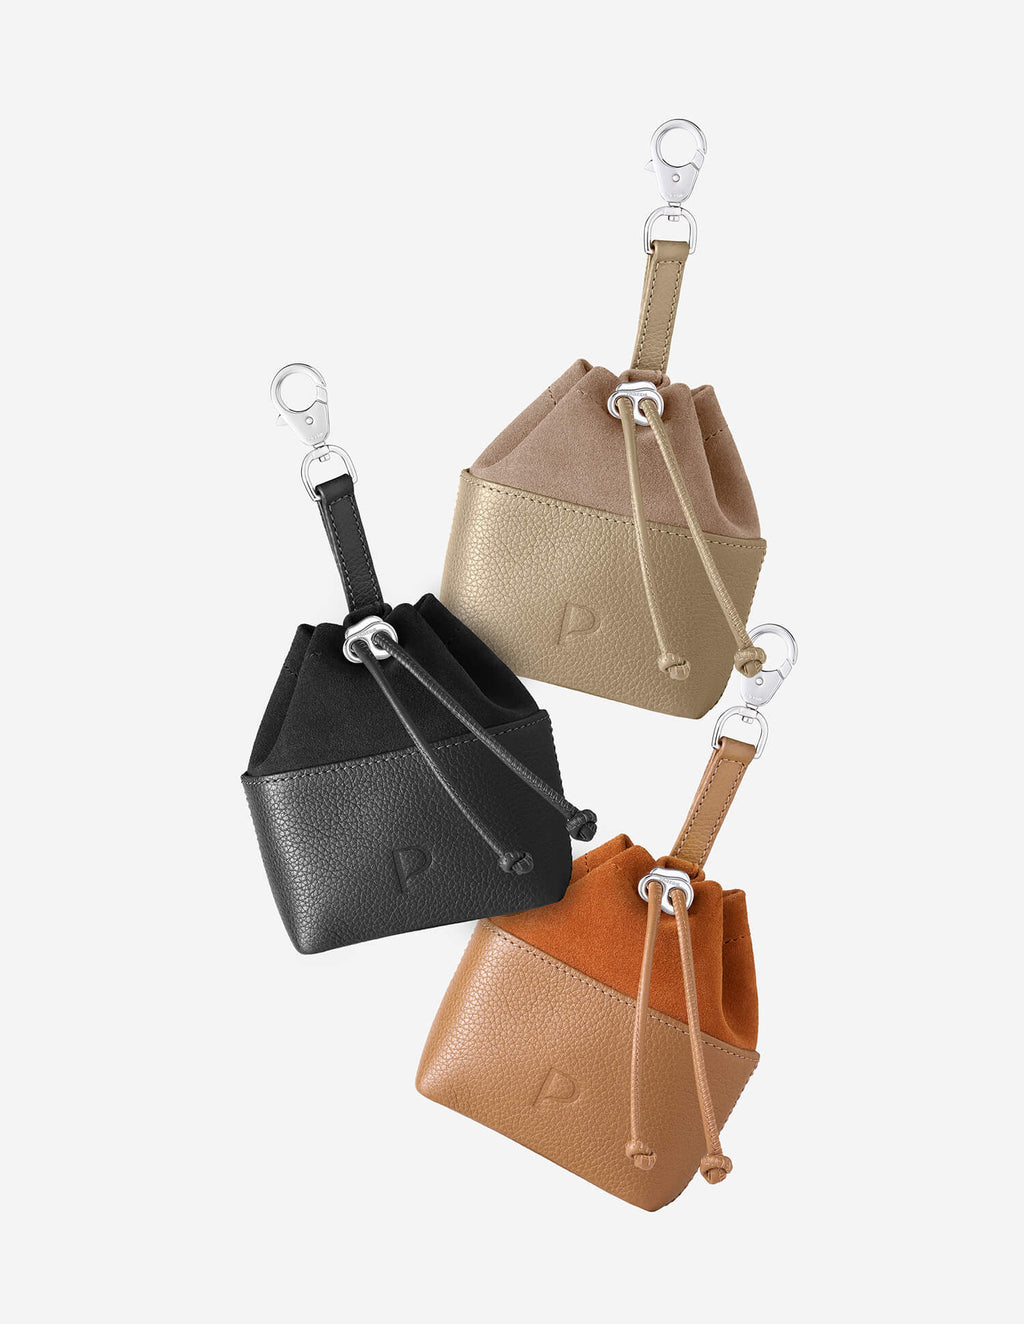 The Nue | Luxury Leather Waste & Treat Bag Holder – PAGERIE